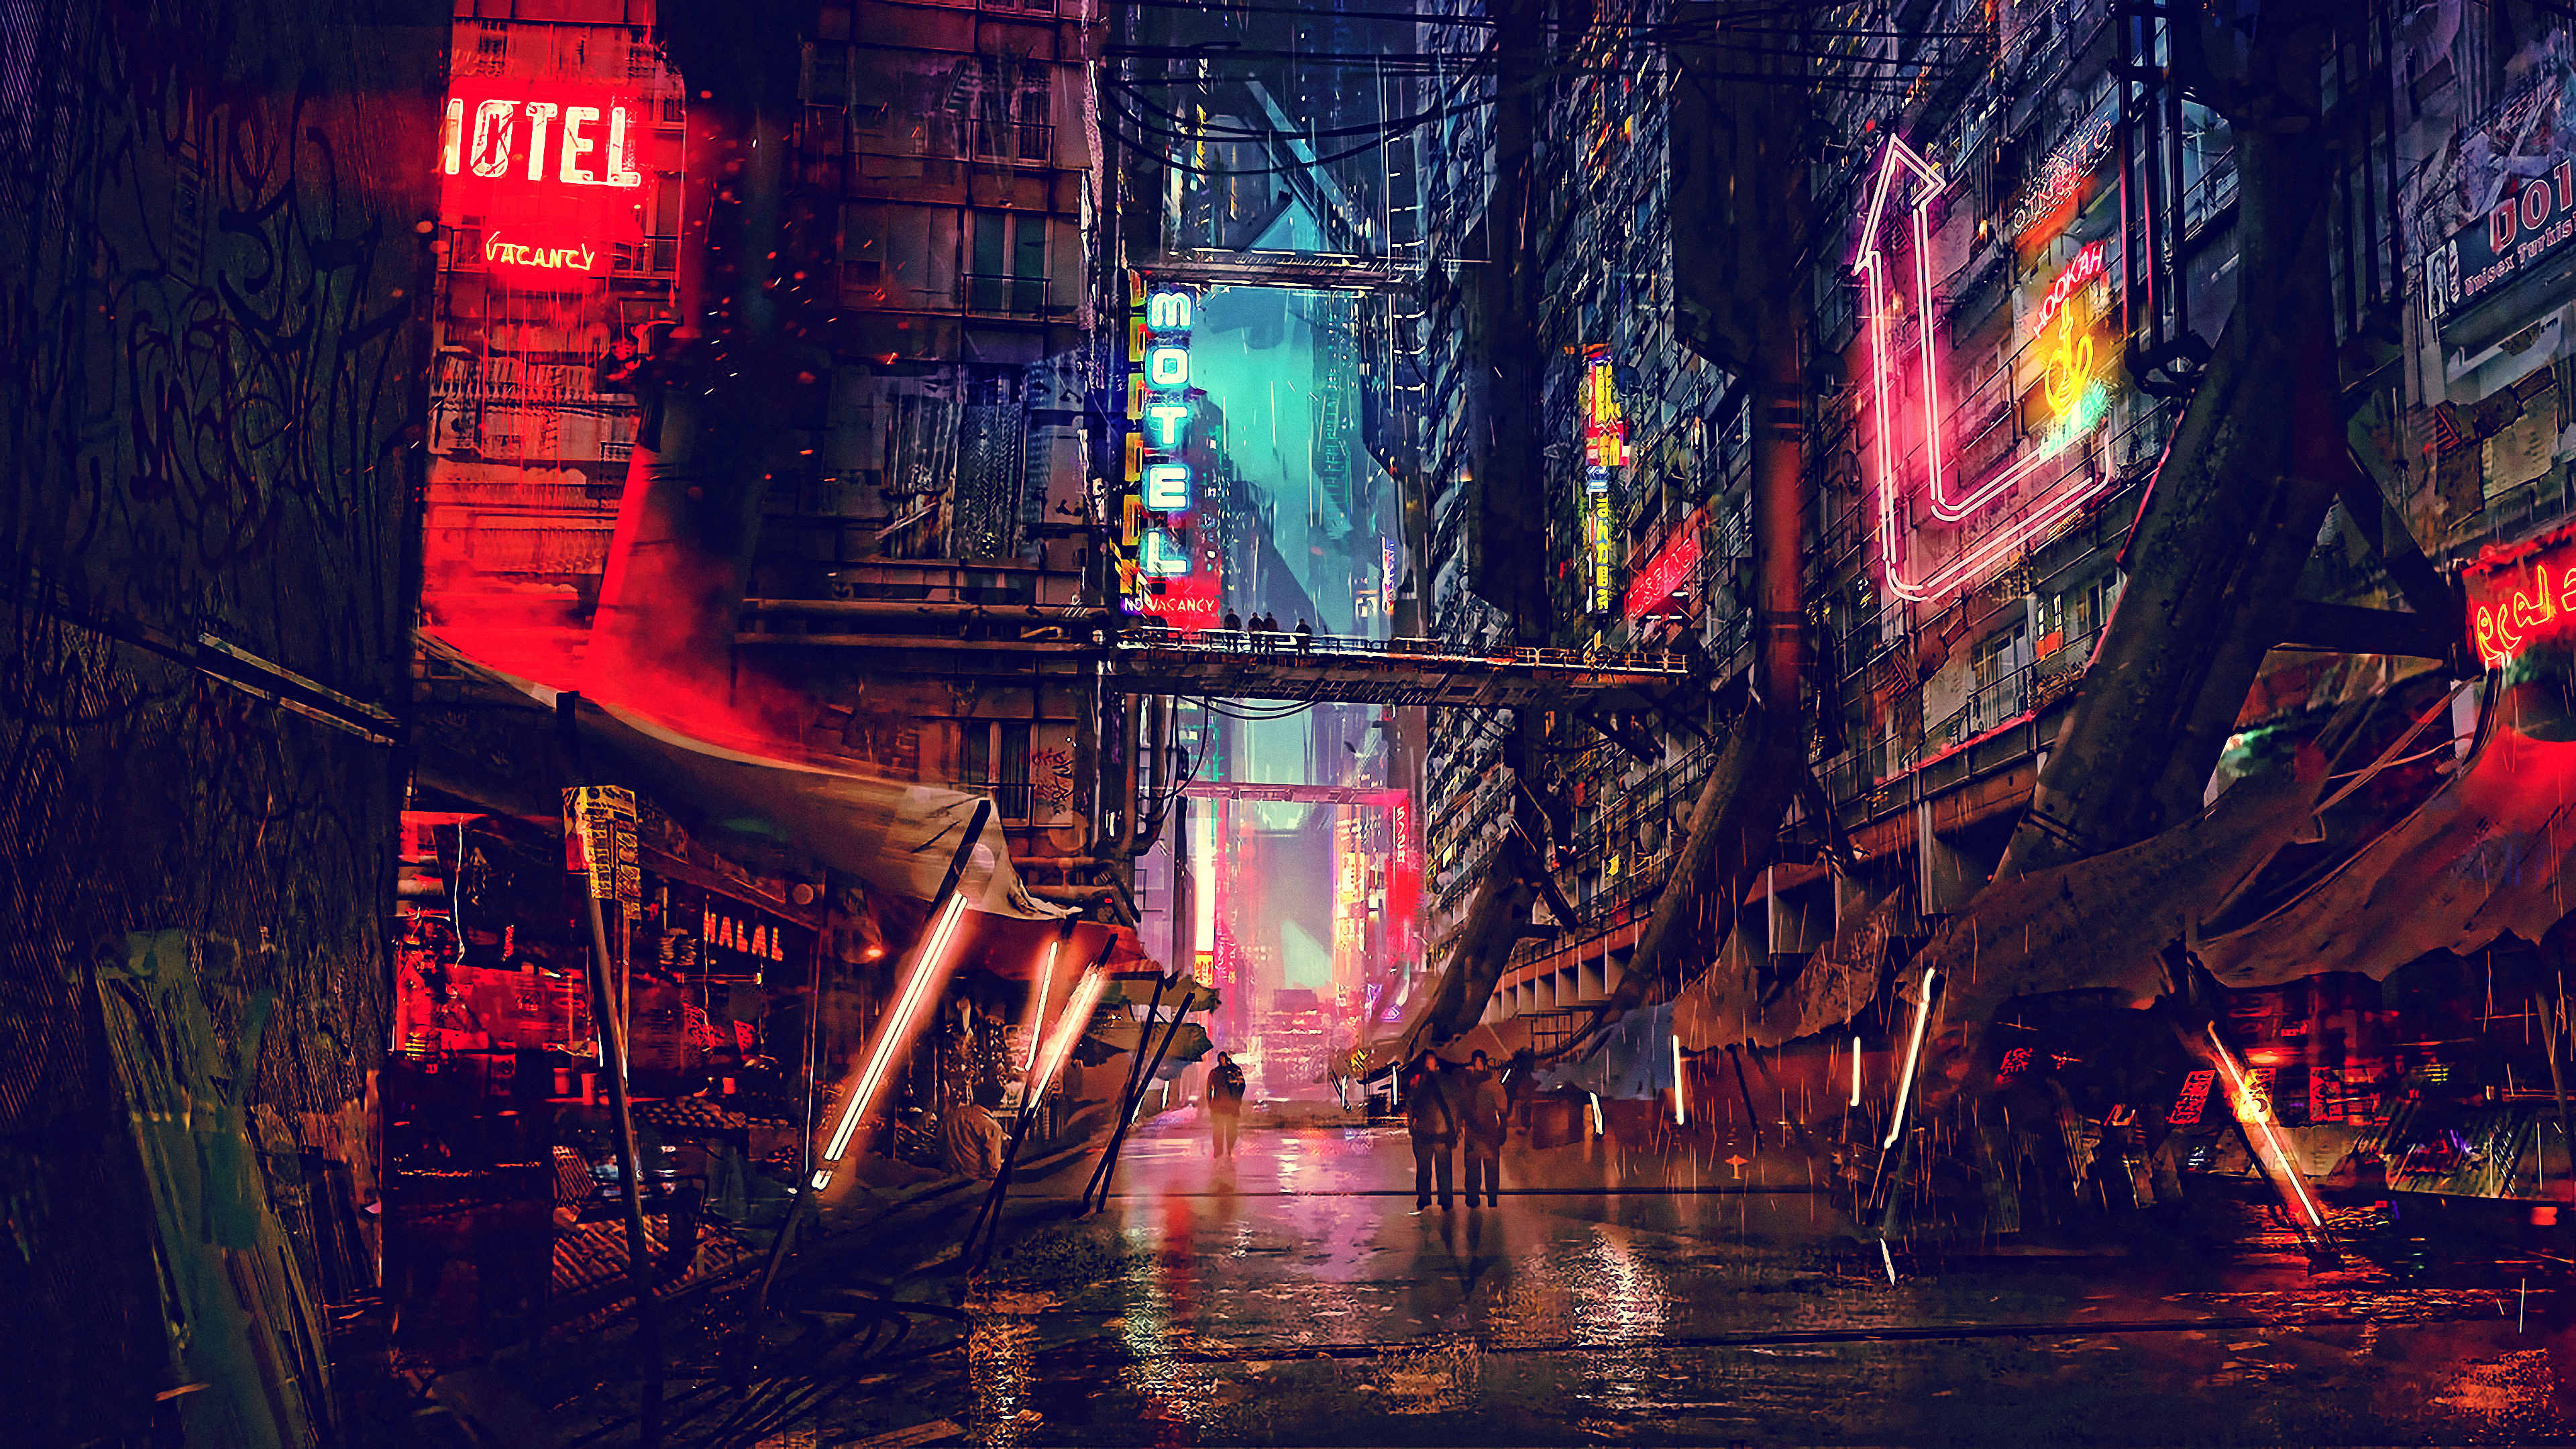 3840x2160 1920x1080 Science Fiction Cyberpunk Futuristic City Digital Art 4k Laptop Full HD 1080P HD 4k Wallpapers, Images, Backgrounds, Photos and Pictures